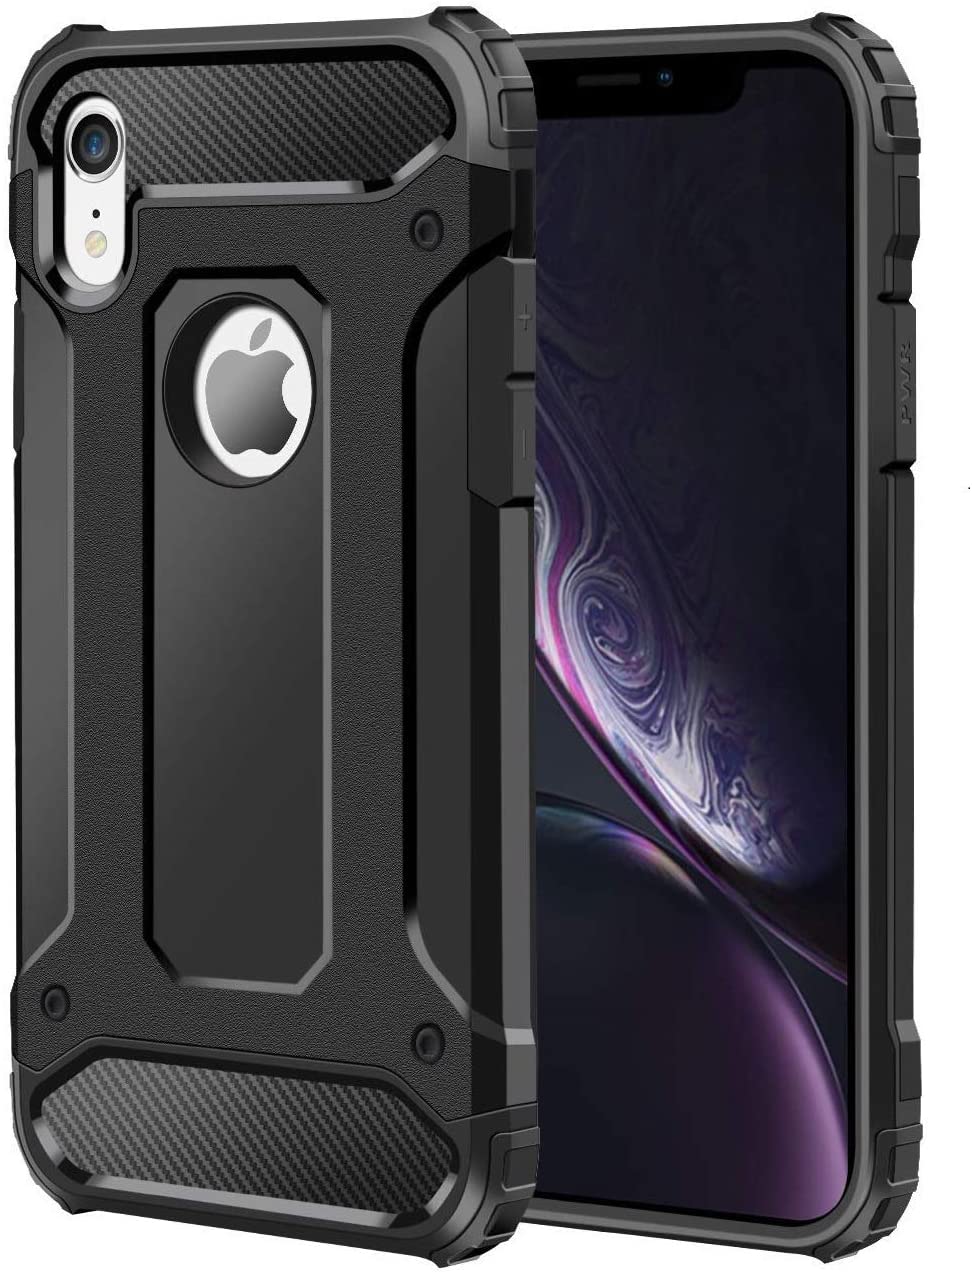 Armor iPhone XS max Case - e4cents